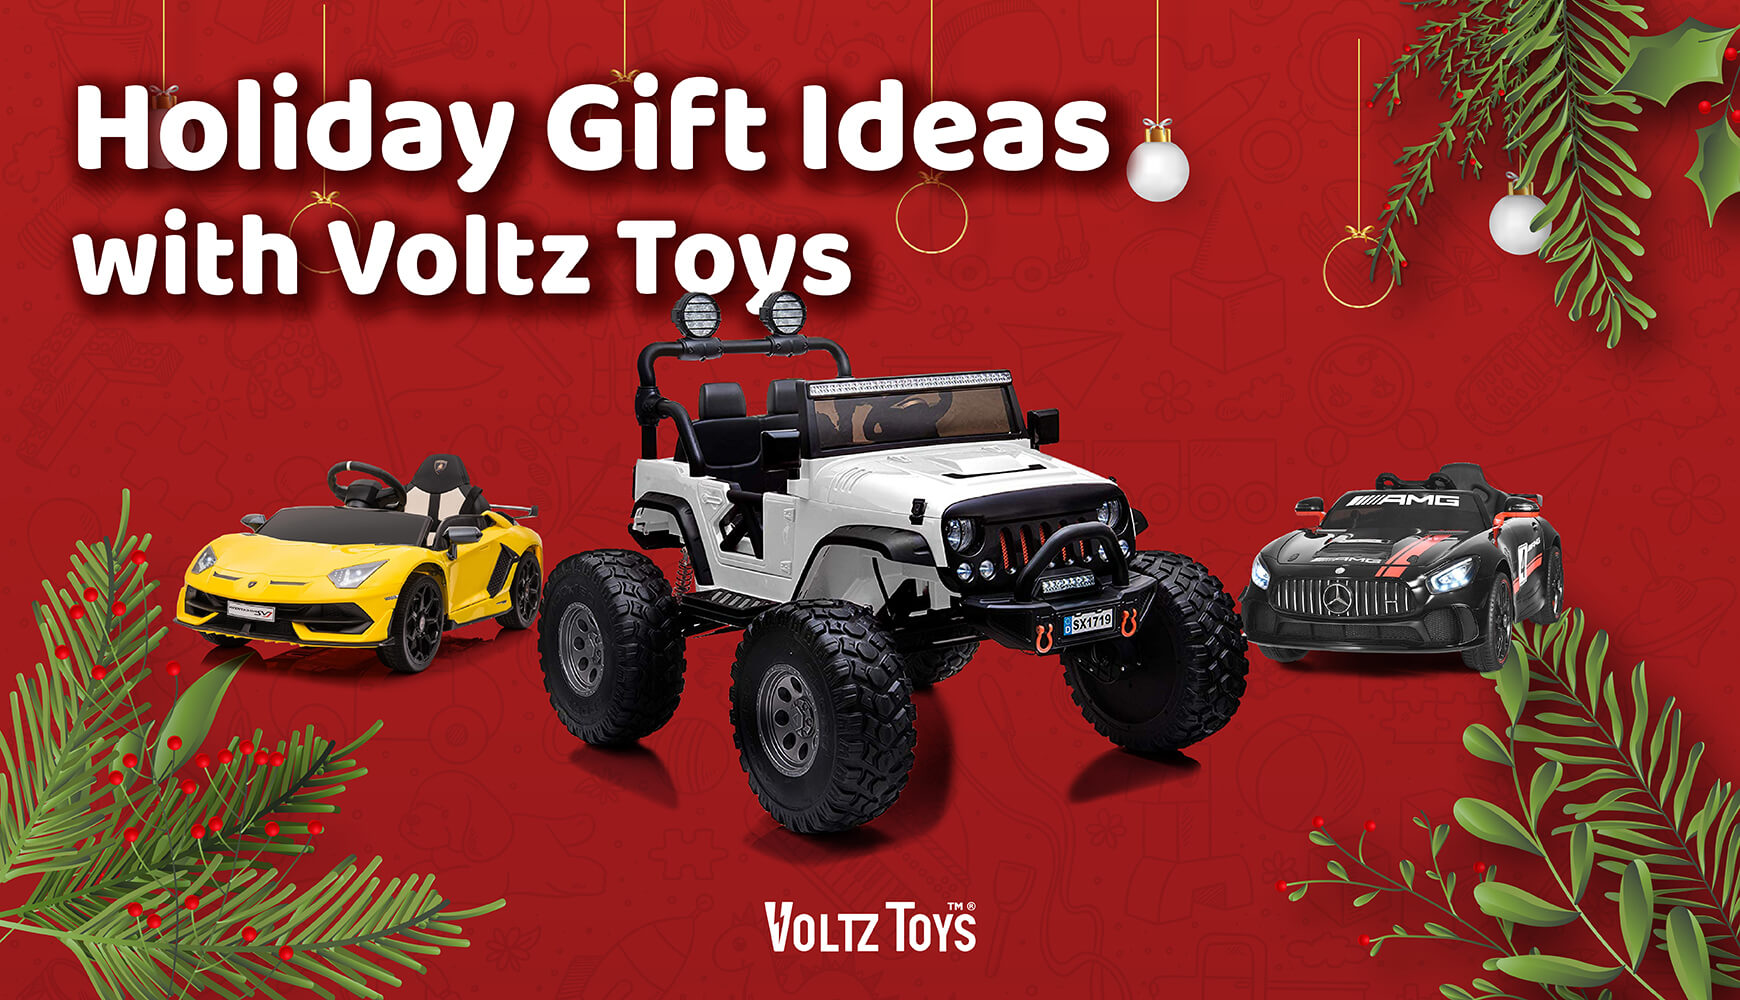 Holiday Gift Ideas with Voltz Toys